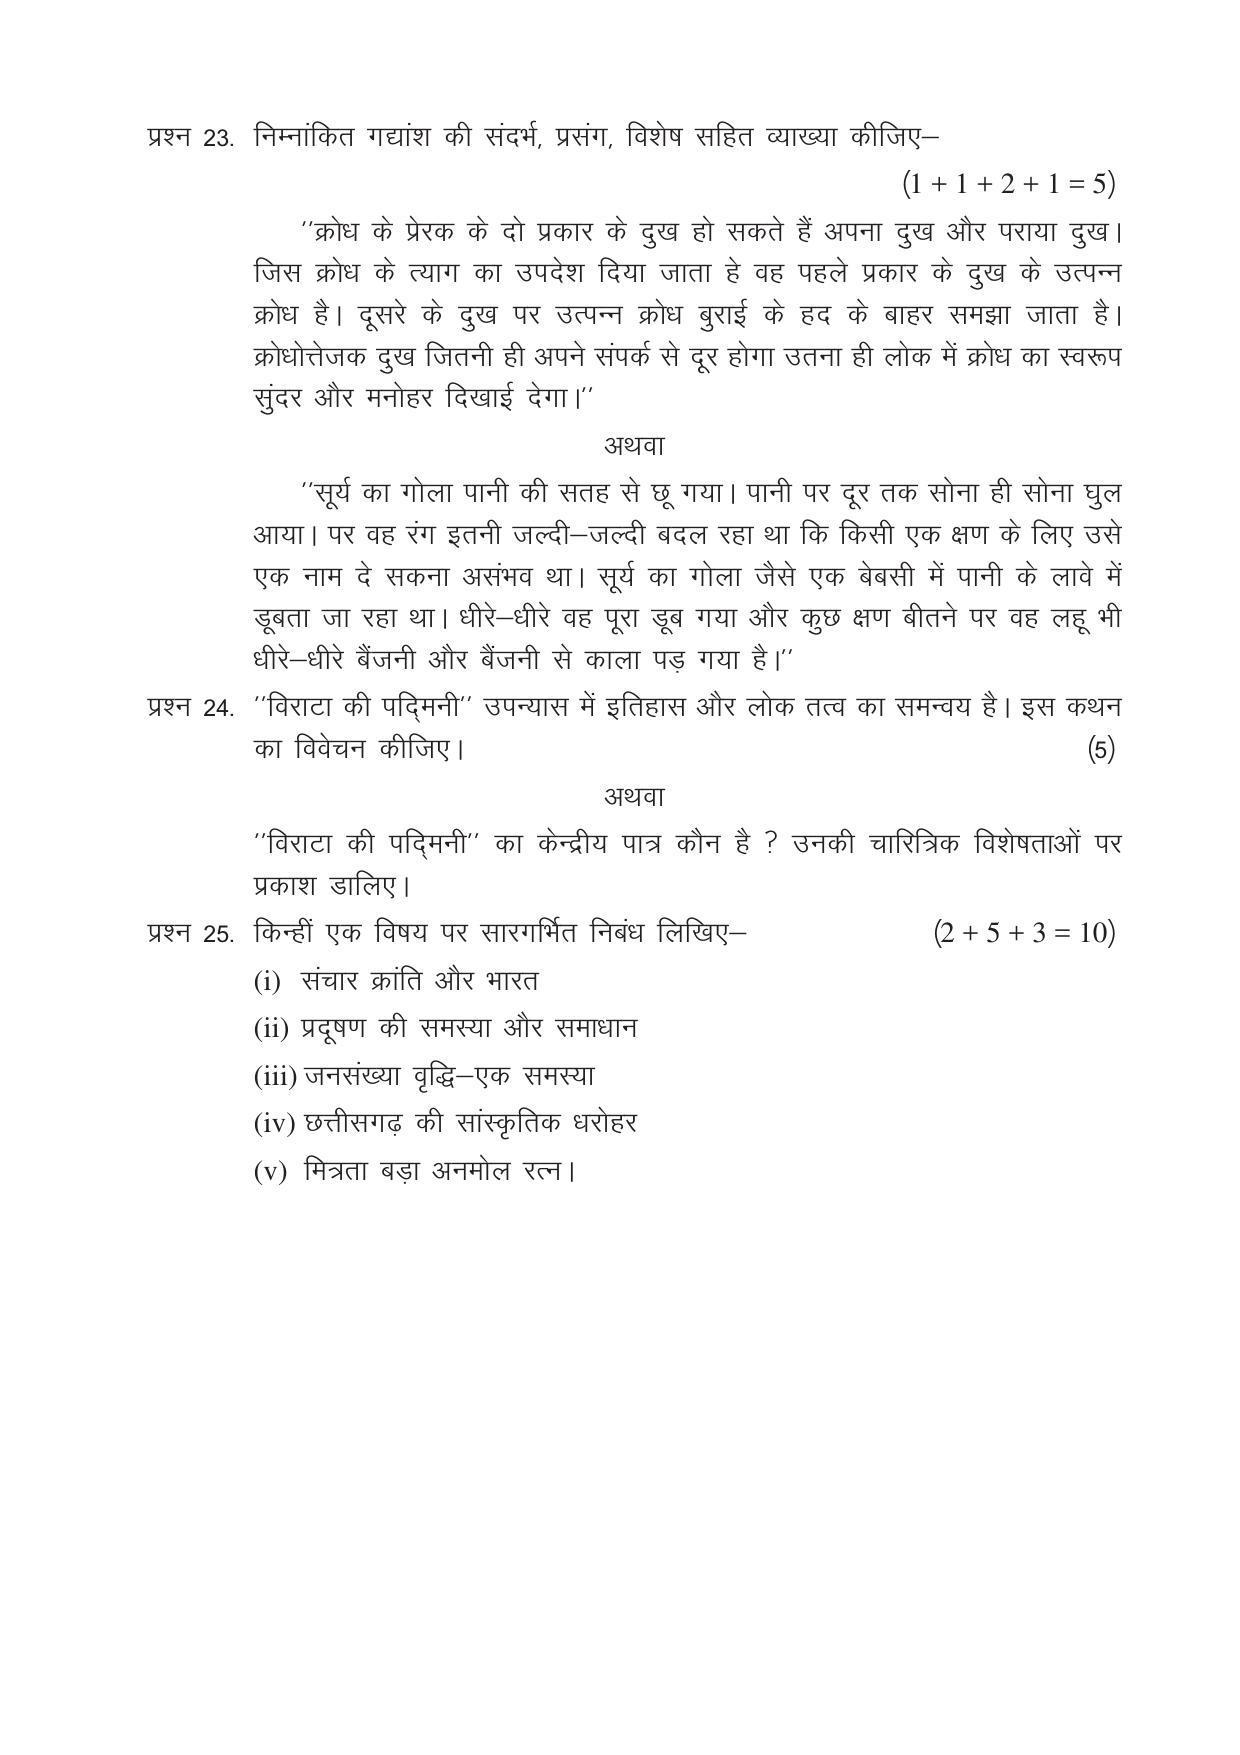 CGSOS Class 12 Model Question Paper - Hindi - II - Page 5